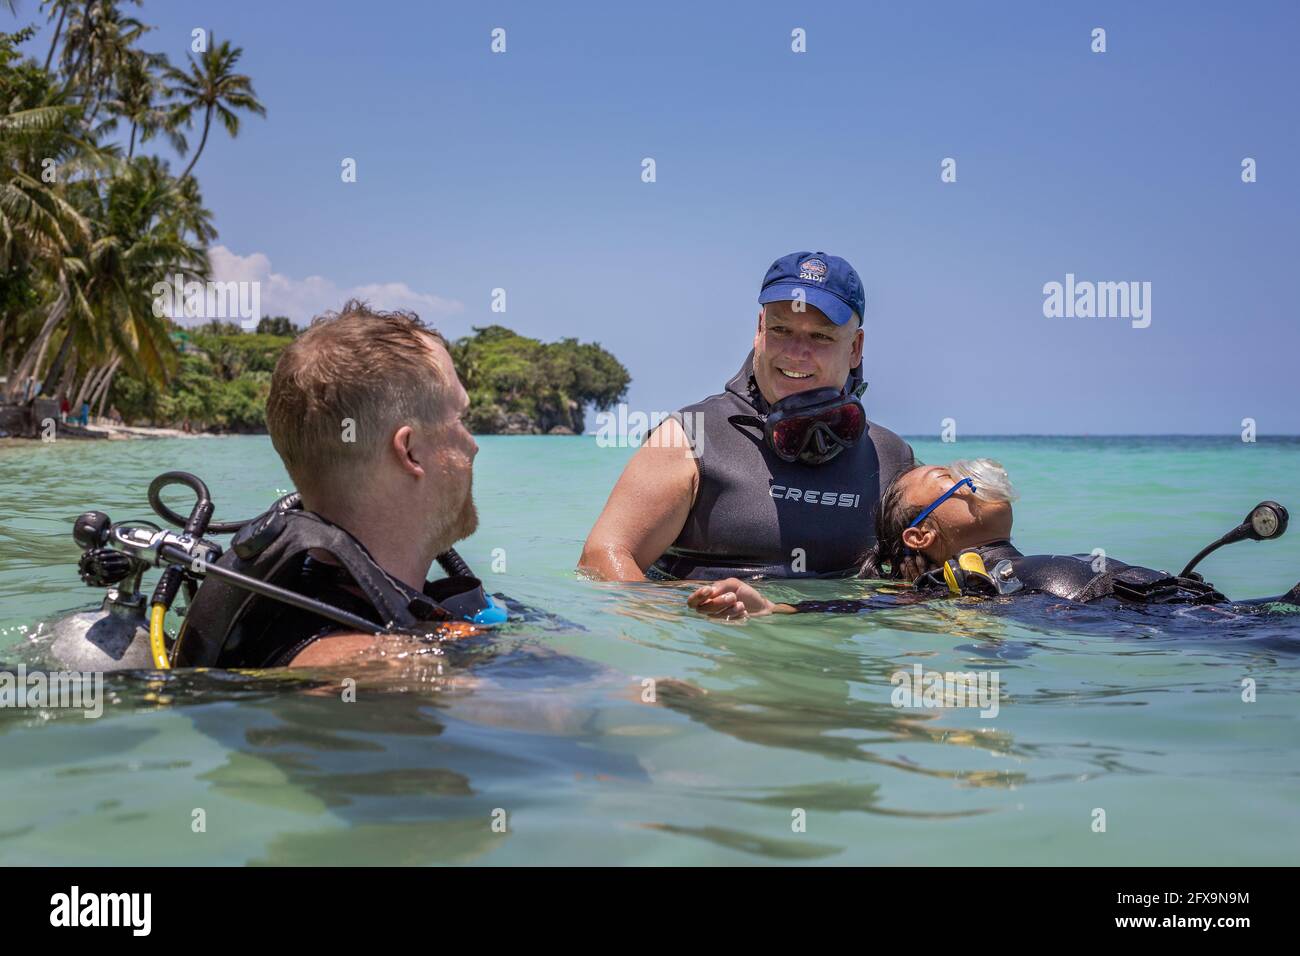 Panglao, Philippines - April 29, 2021: Scuba diver, instructor in confined water teaching, studying, evaluating skills, rescue skills Stock Photo